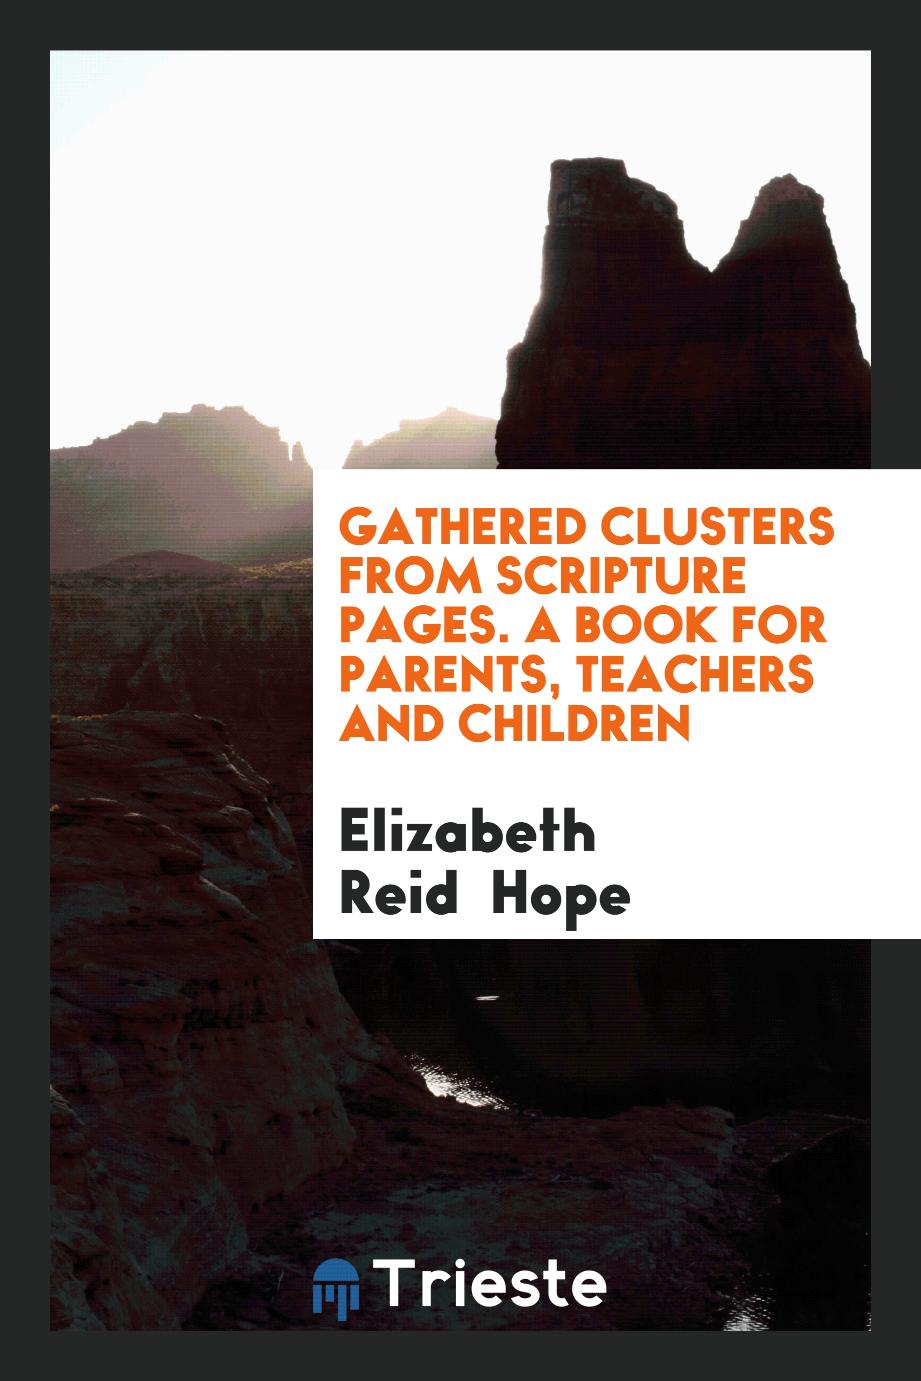 Gathered Clusters from Scripture Pages. A Book For Parents, Teachers And Children